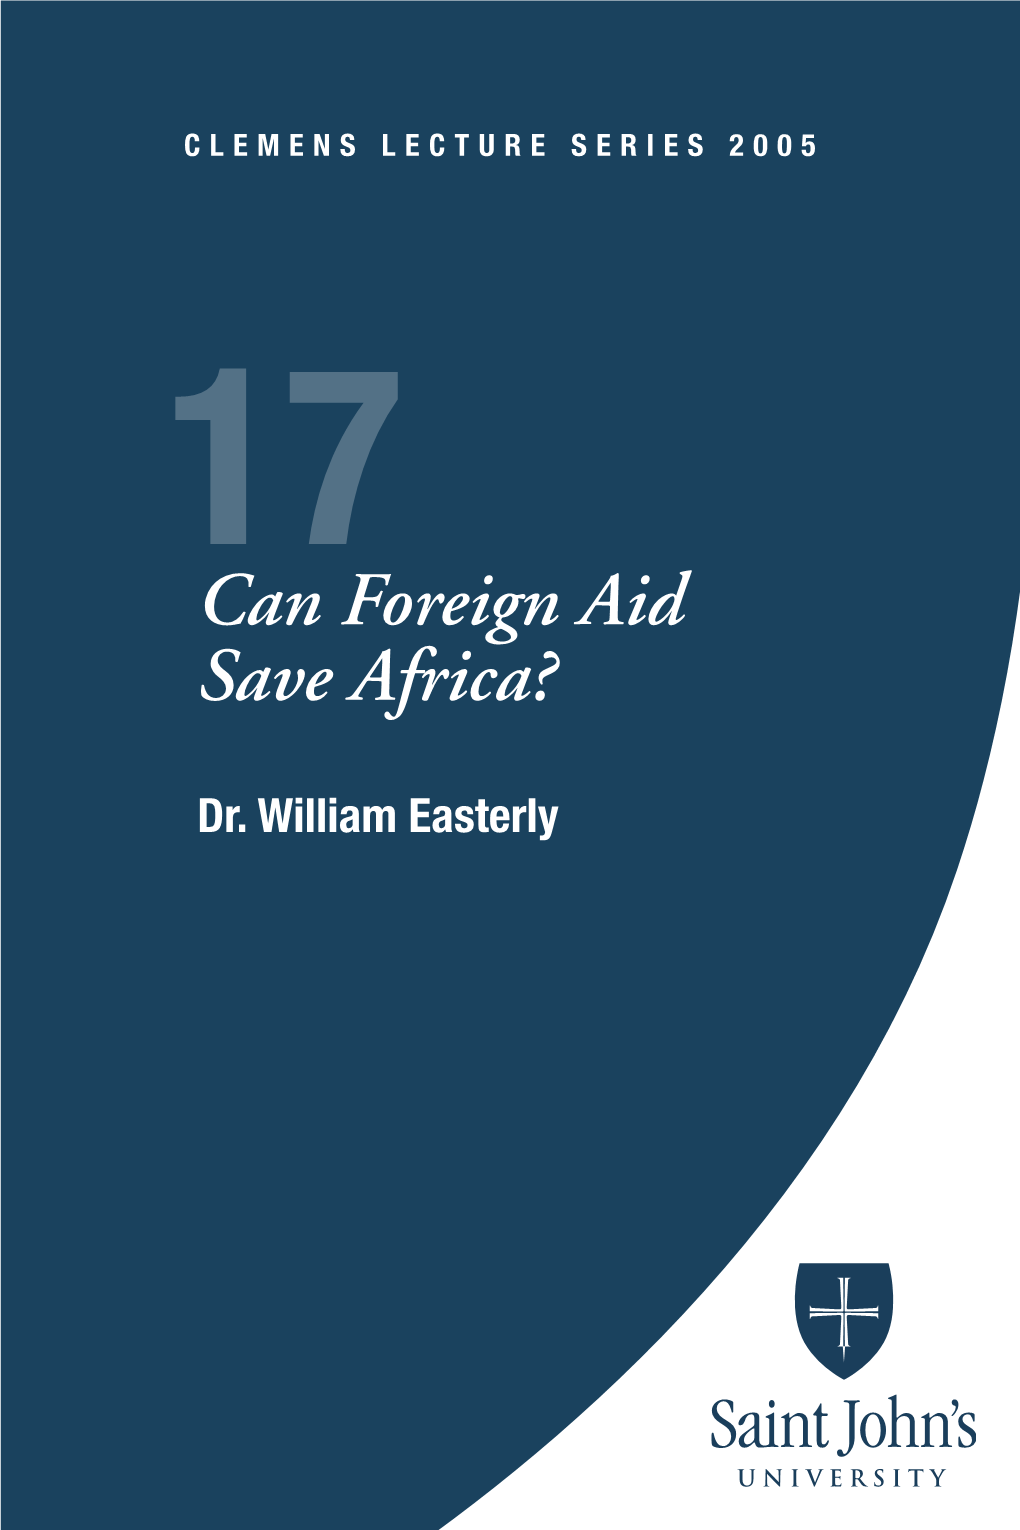 Can Foreign Aid Save Africa?